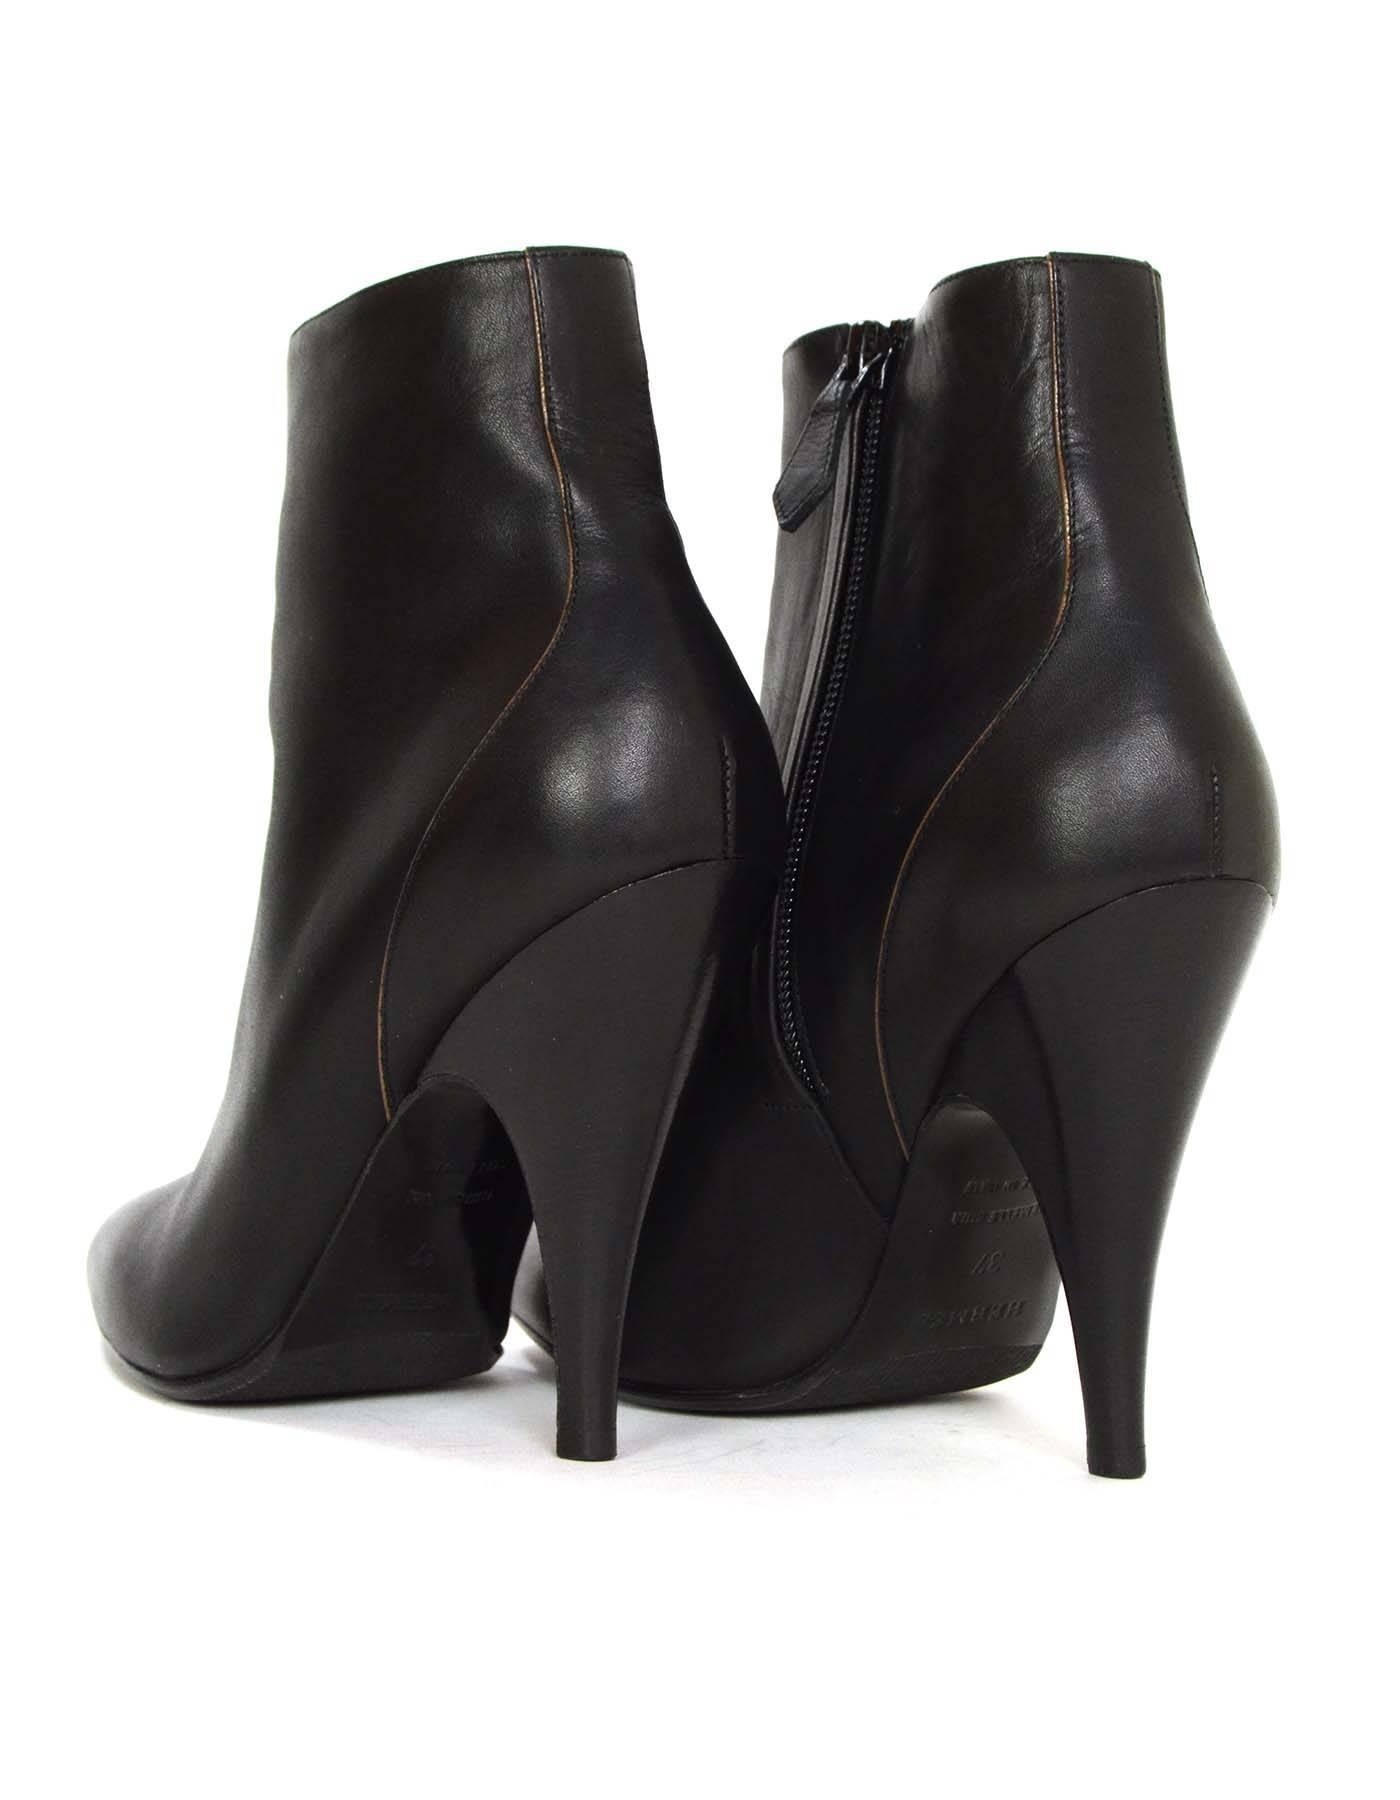 Hermes Black Leather Ankle Booties sz 37 1